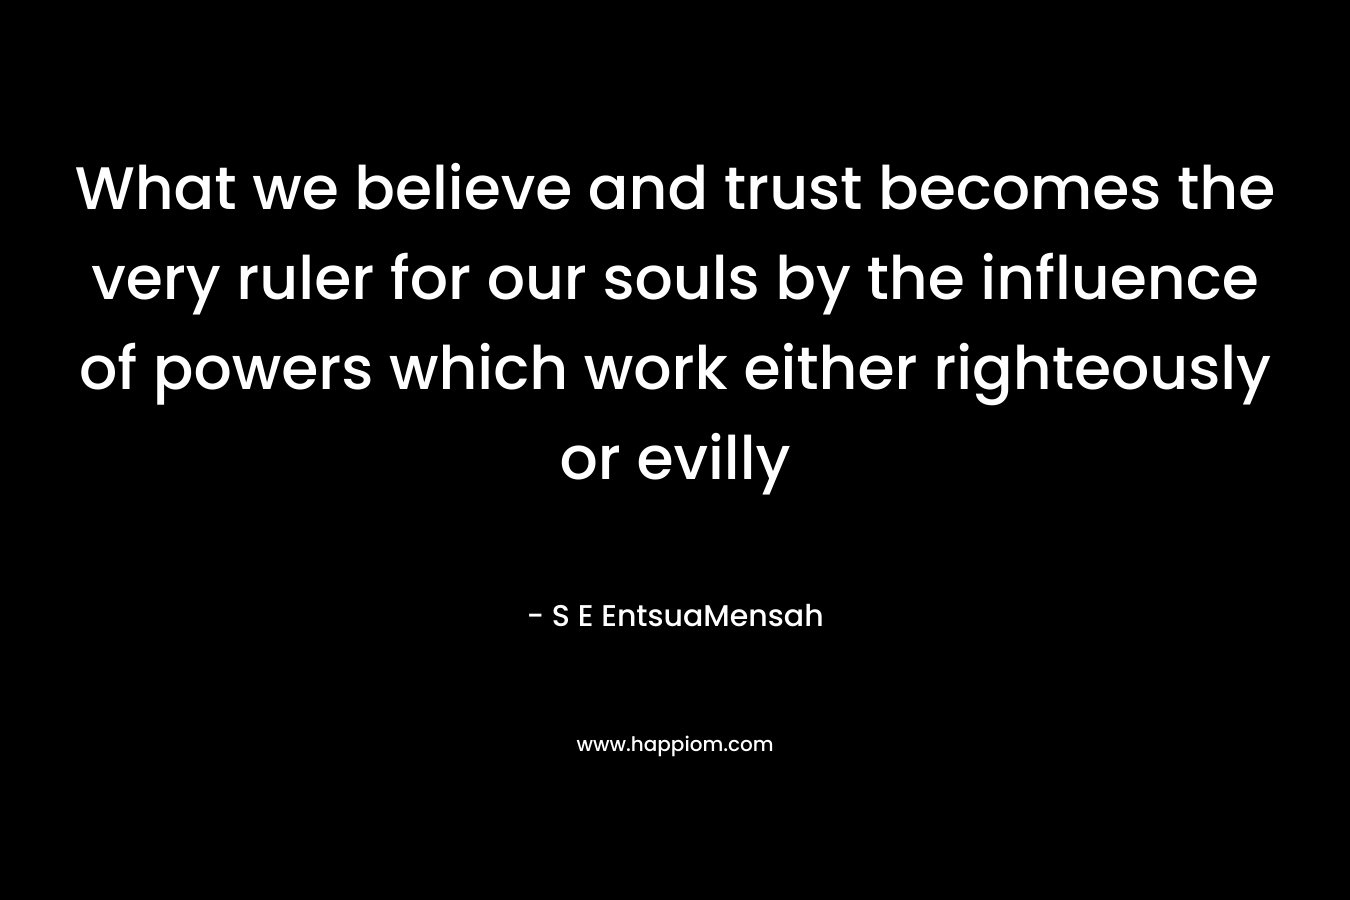 What we believe and trust becomes the very ruler for our souls by the influence of powers which work either righteously or evilly – S E EntsuaMensah